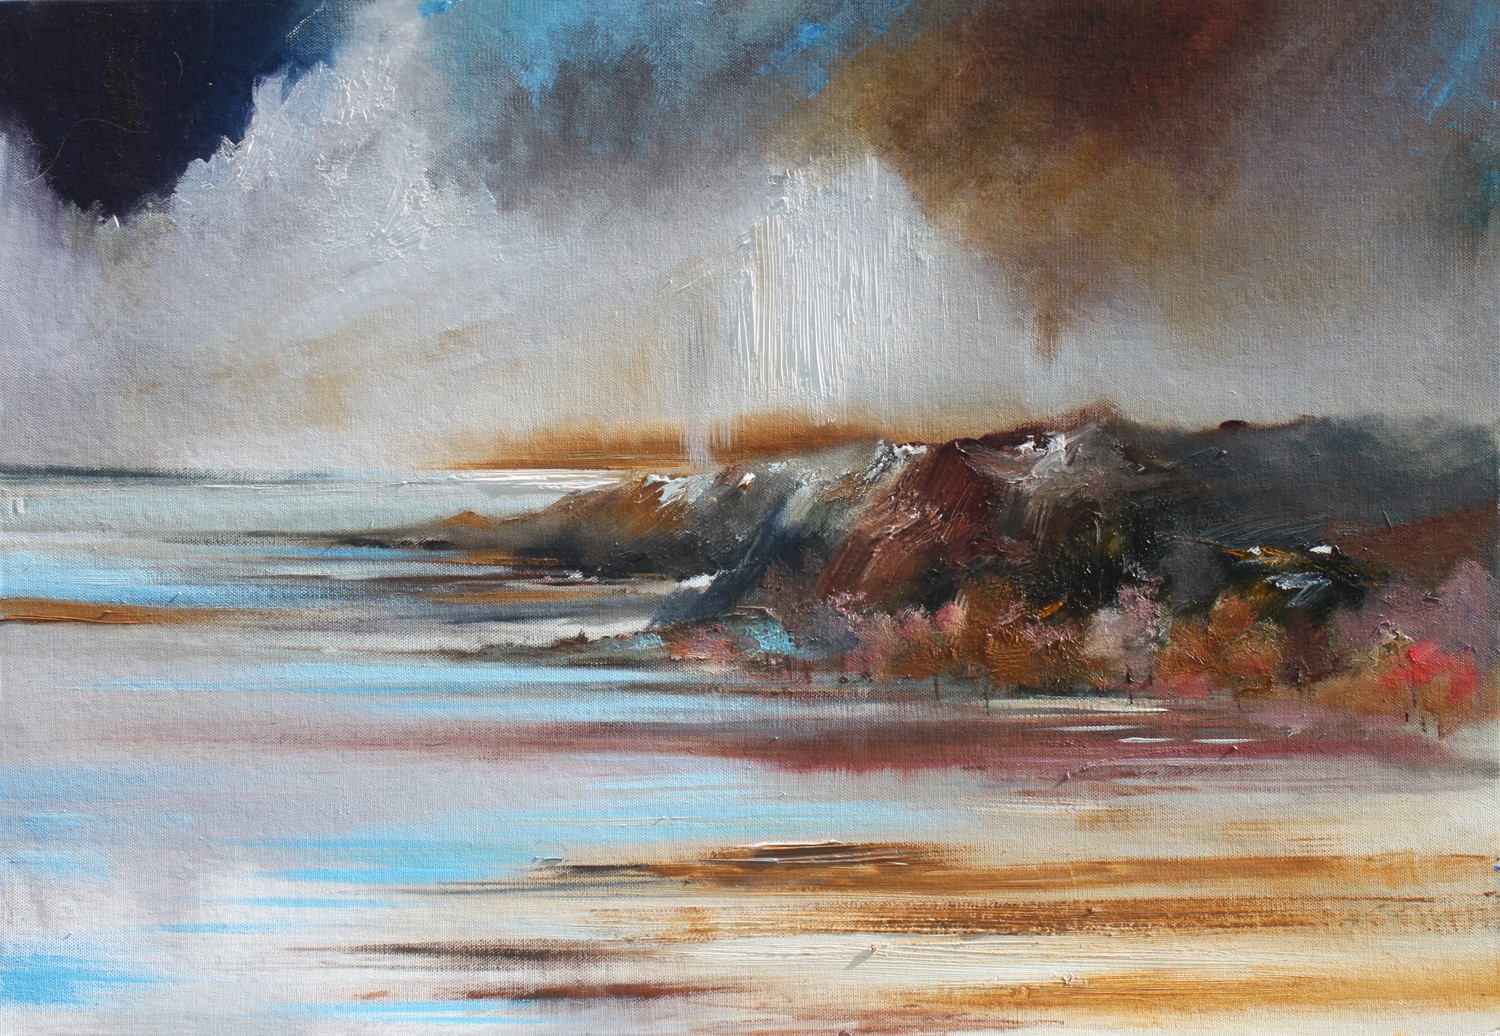 'The Tide is Out' by artist Rosanne Barr